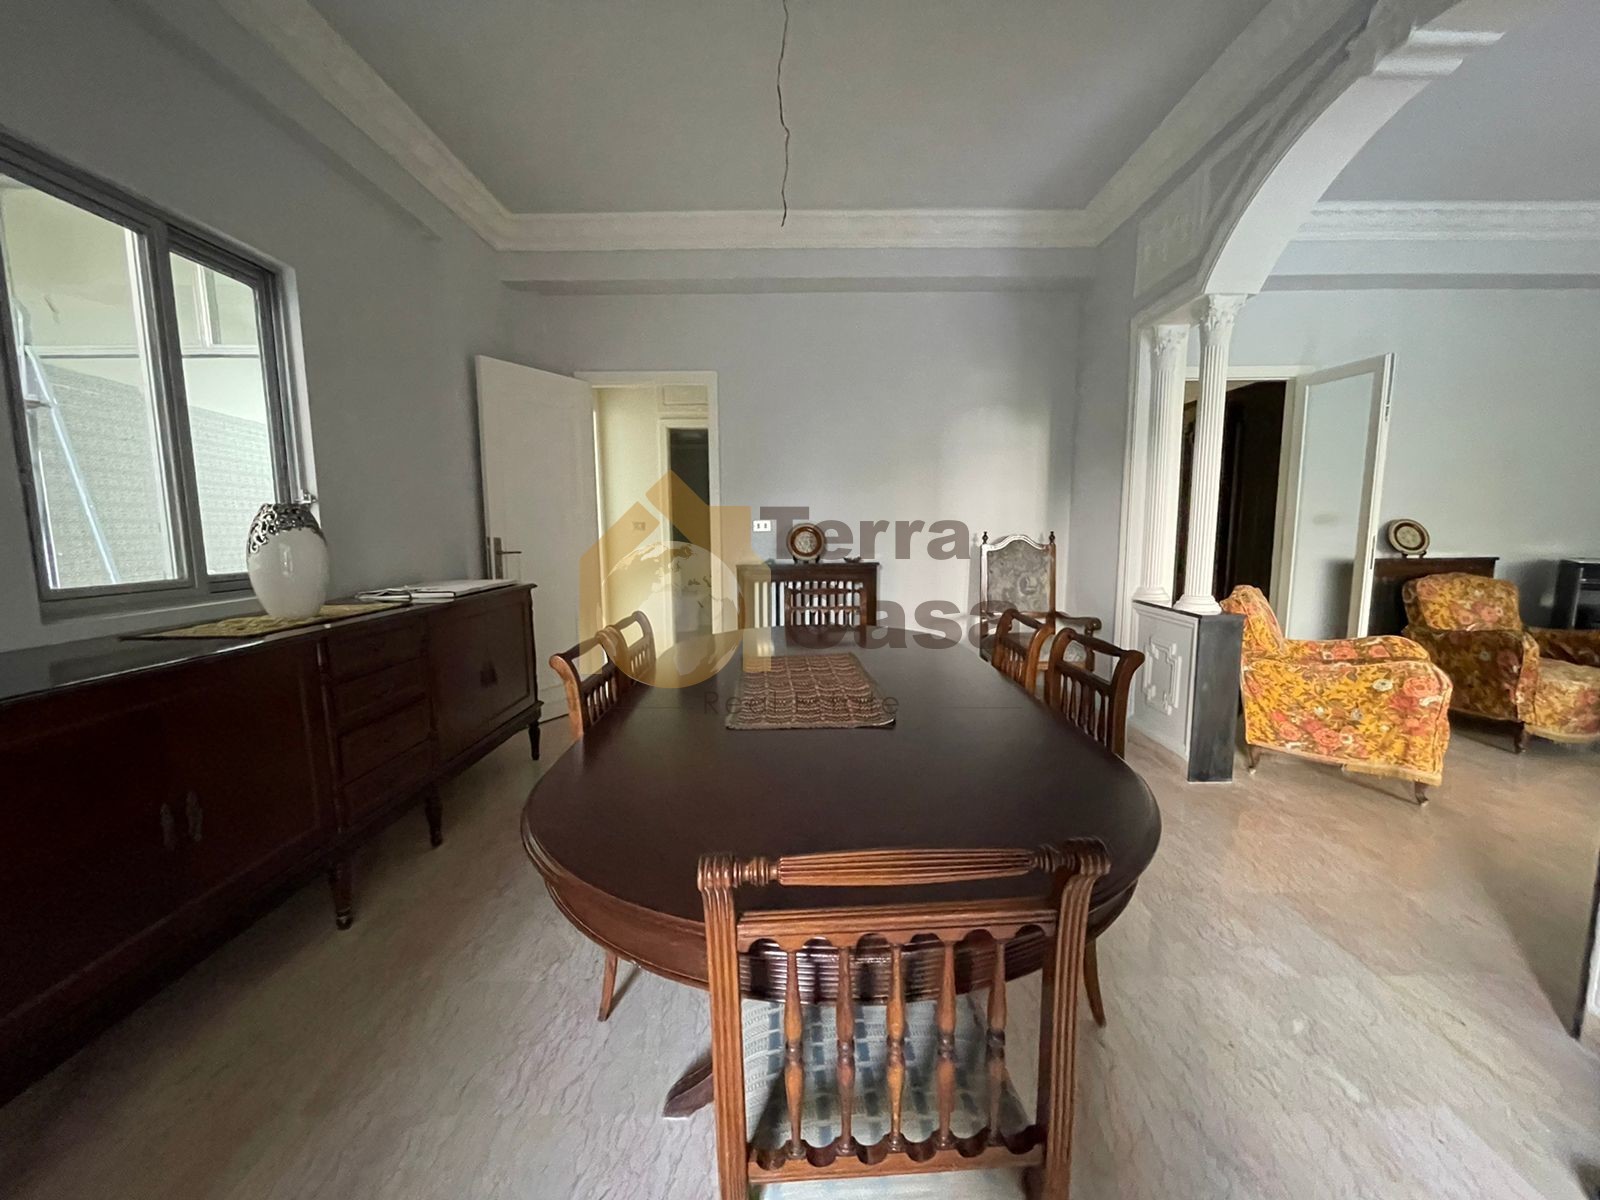 Rmeil fully furnished apartment for rent .